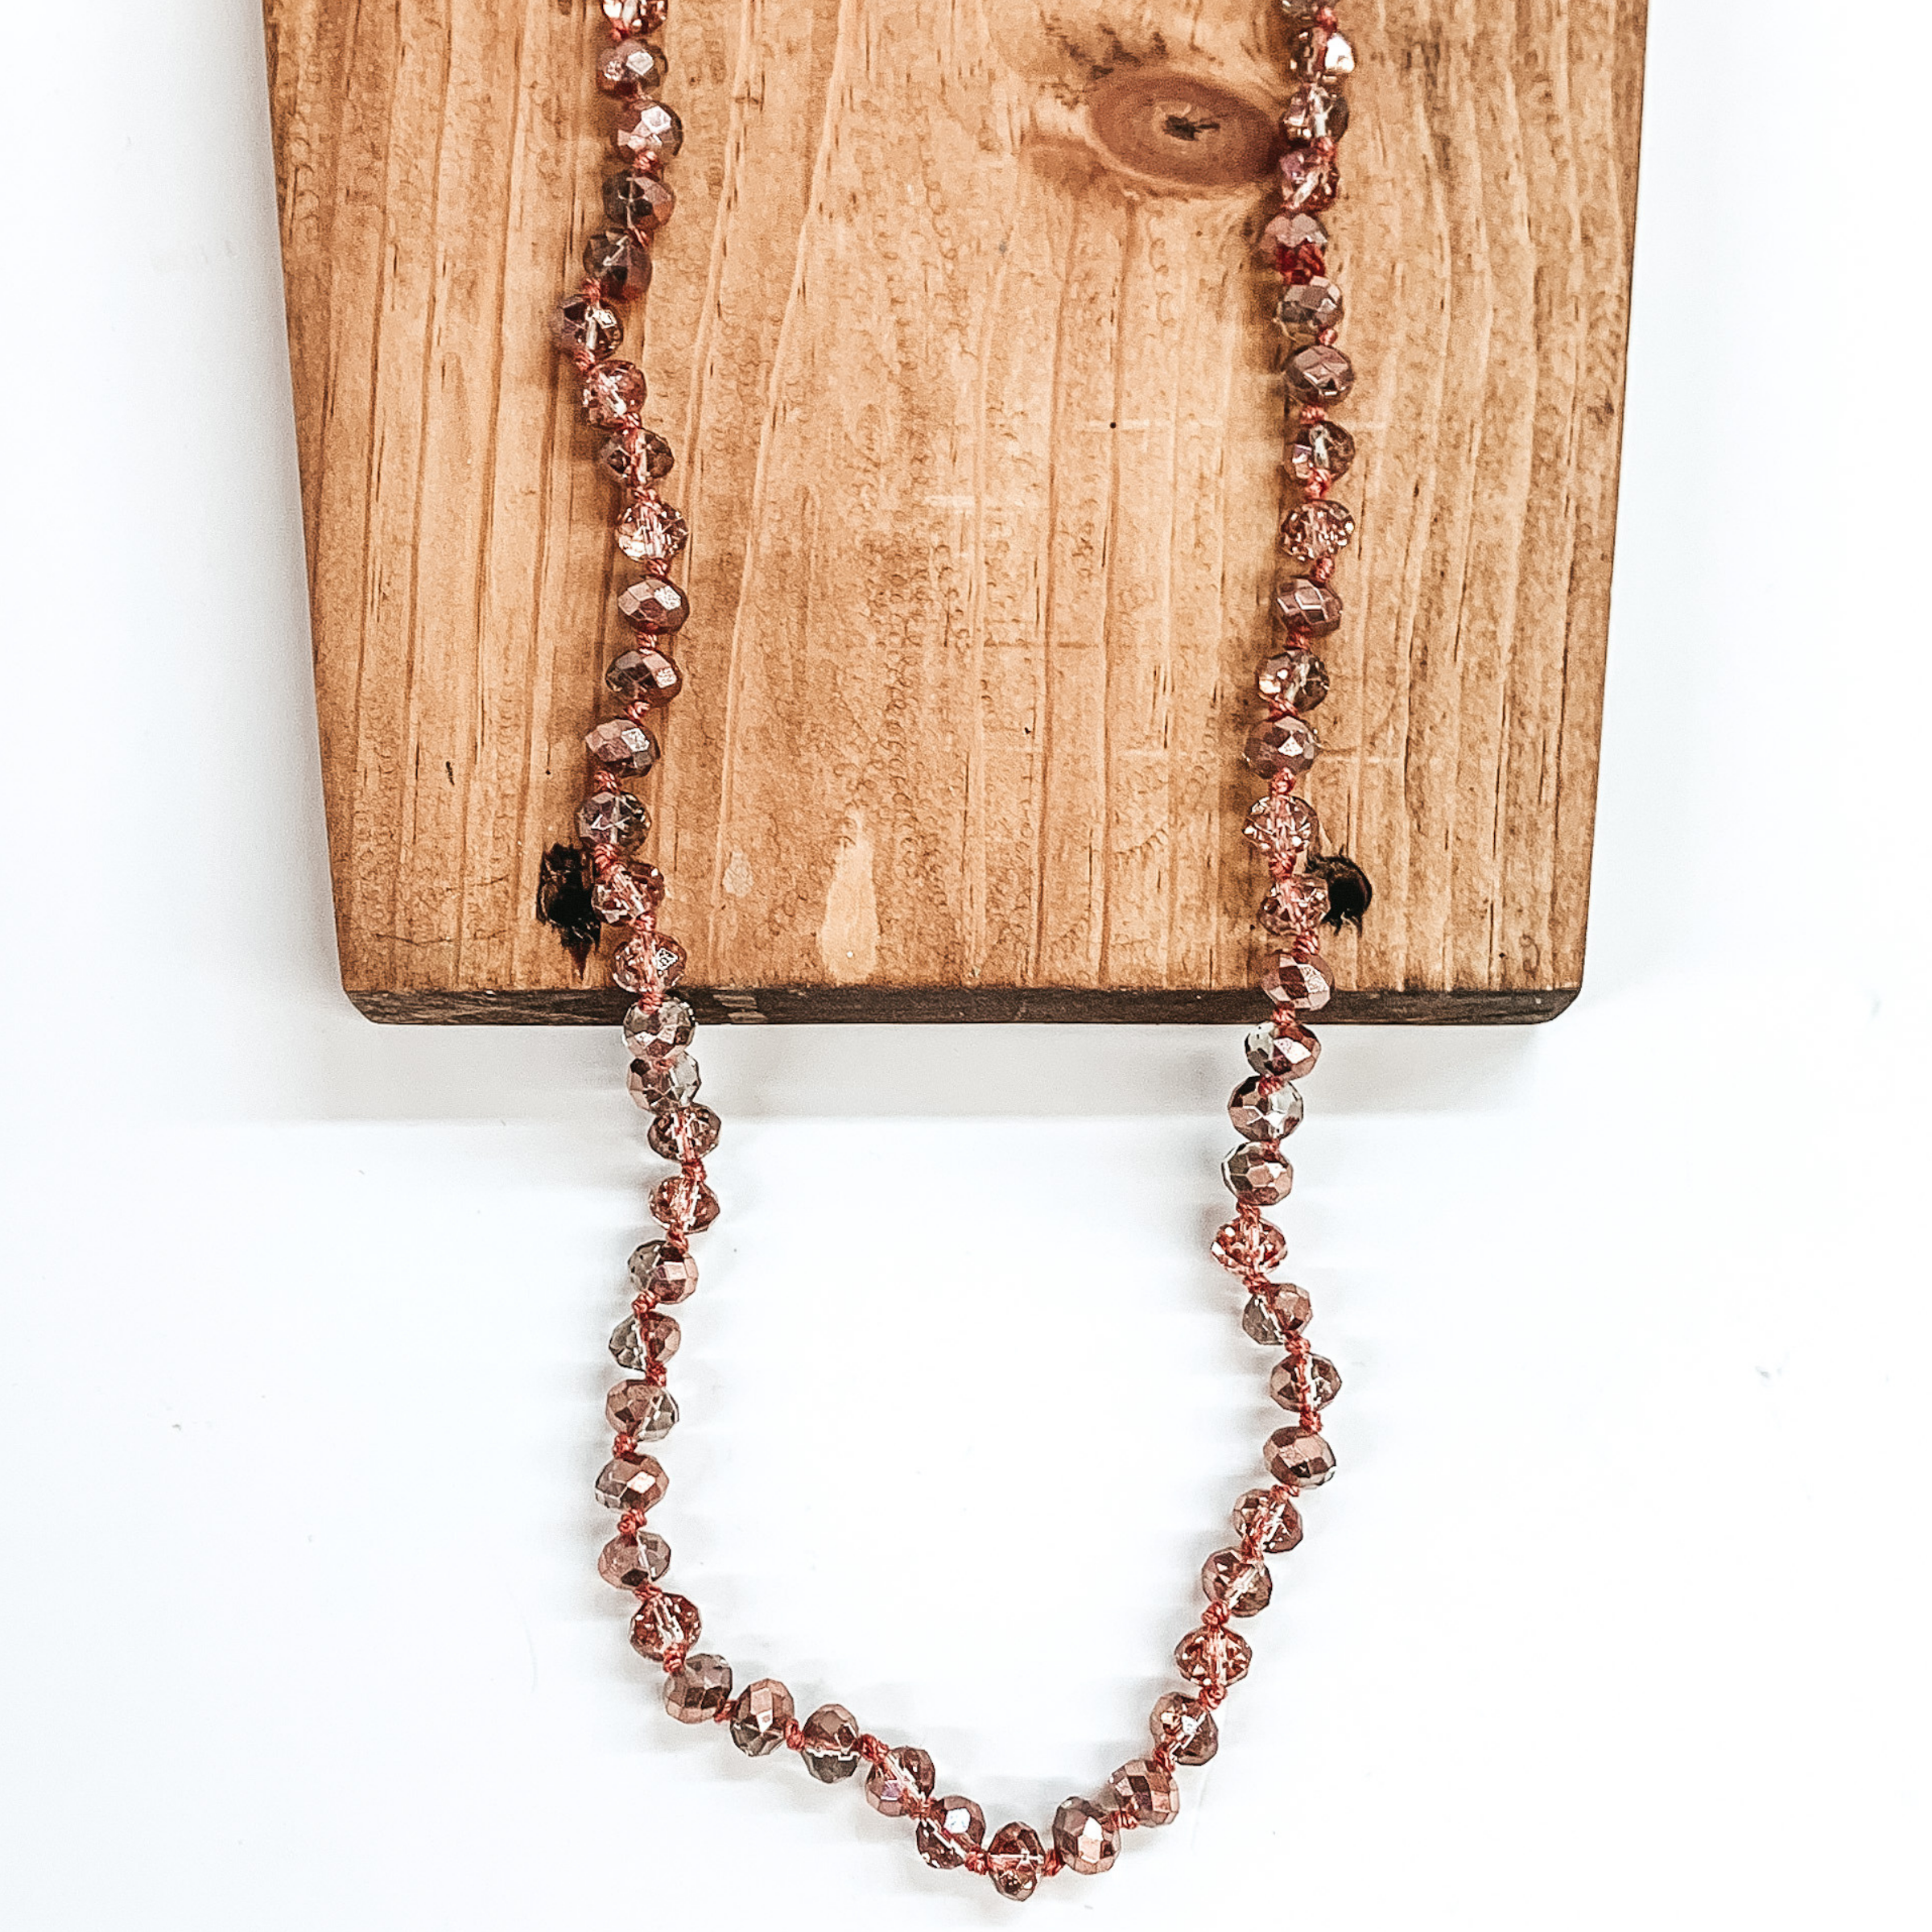 Rose gold and clear mix crystal beaded necklace. This necklace is pictured on a brown block on a white background.